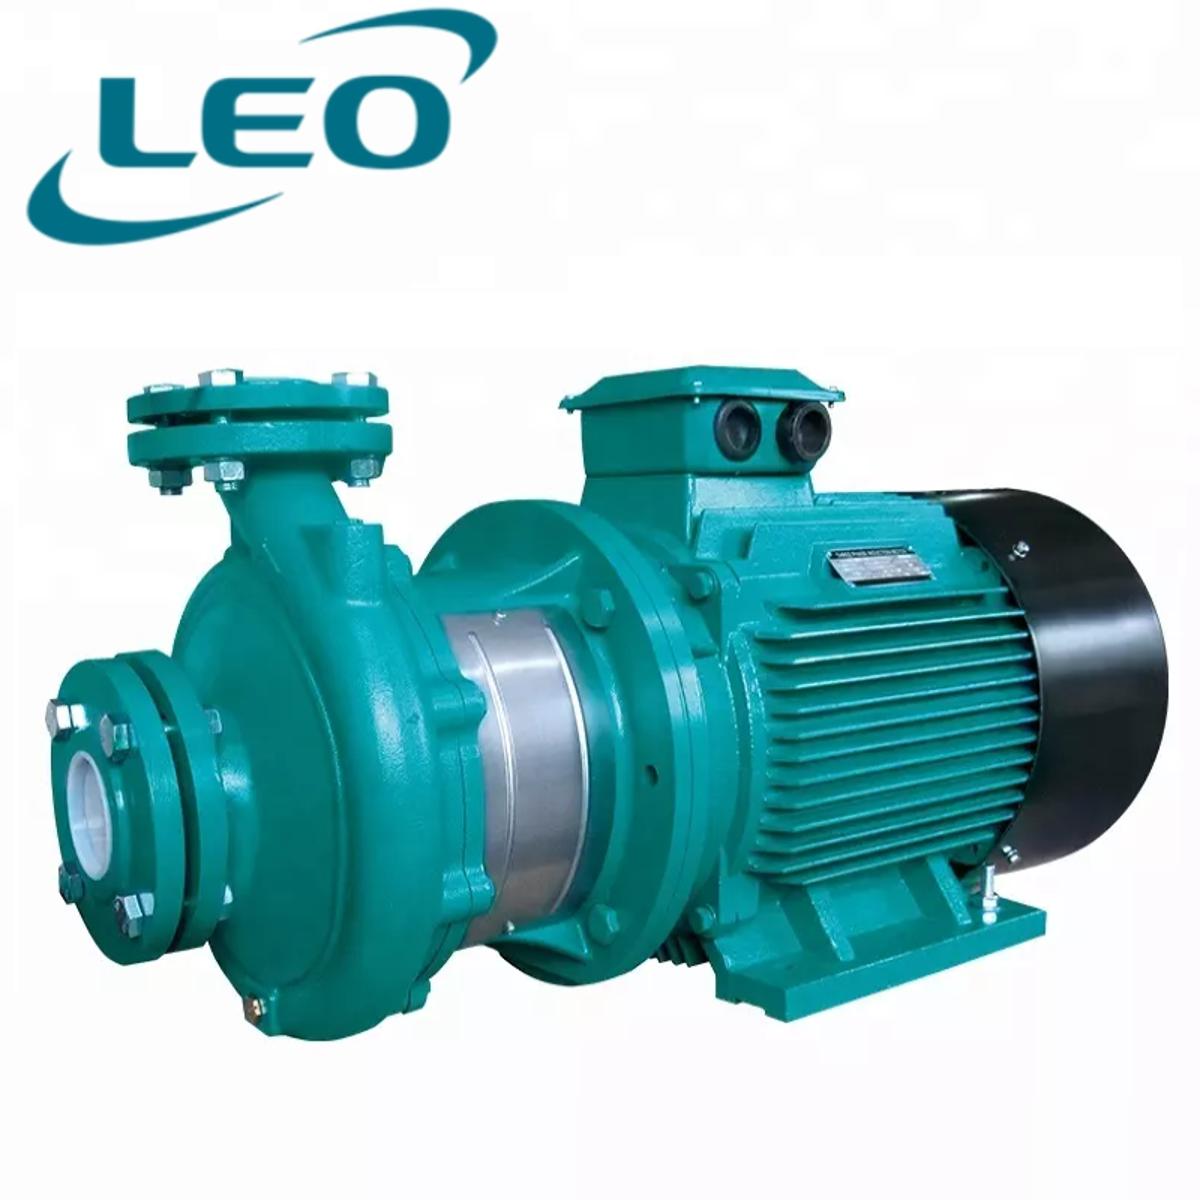 LEO - XST-65-160-110 - 11000 W - 15 HP - Clean Water HEAVY DUTY Centrifugal Pump With FLANGES  - 380V~400V THREE PHASE - SIZE :- 3" x 2 1-2  " - European STANDARD